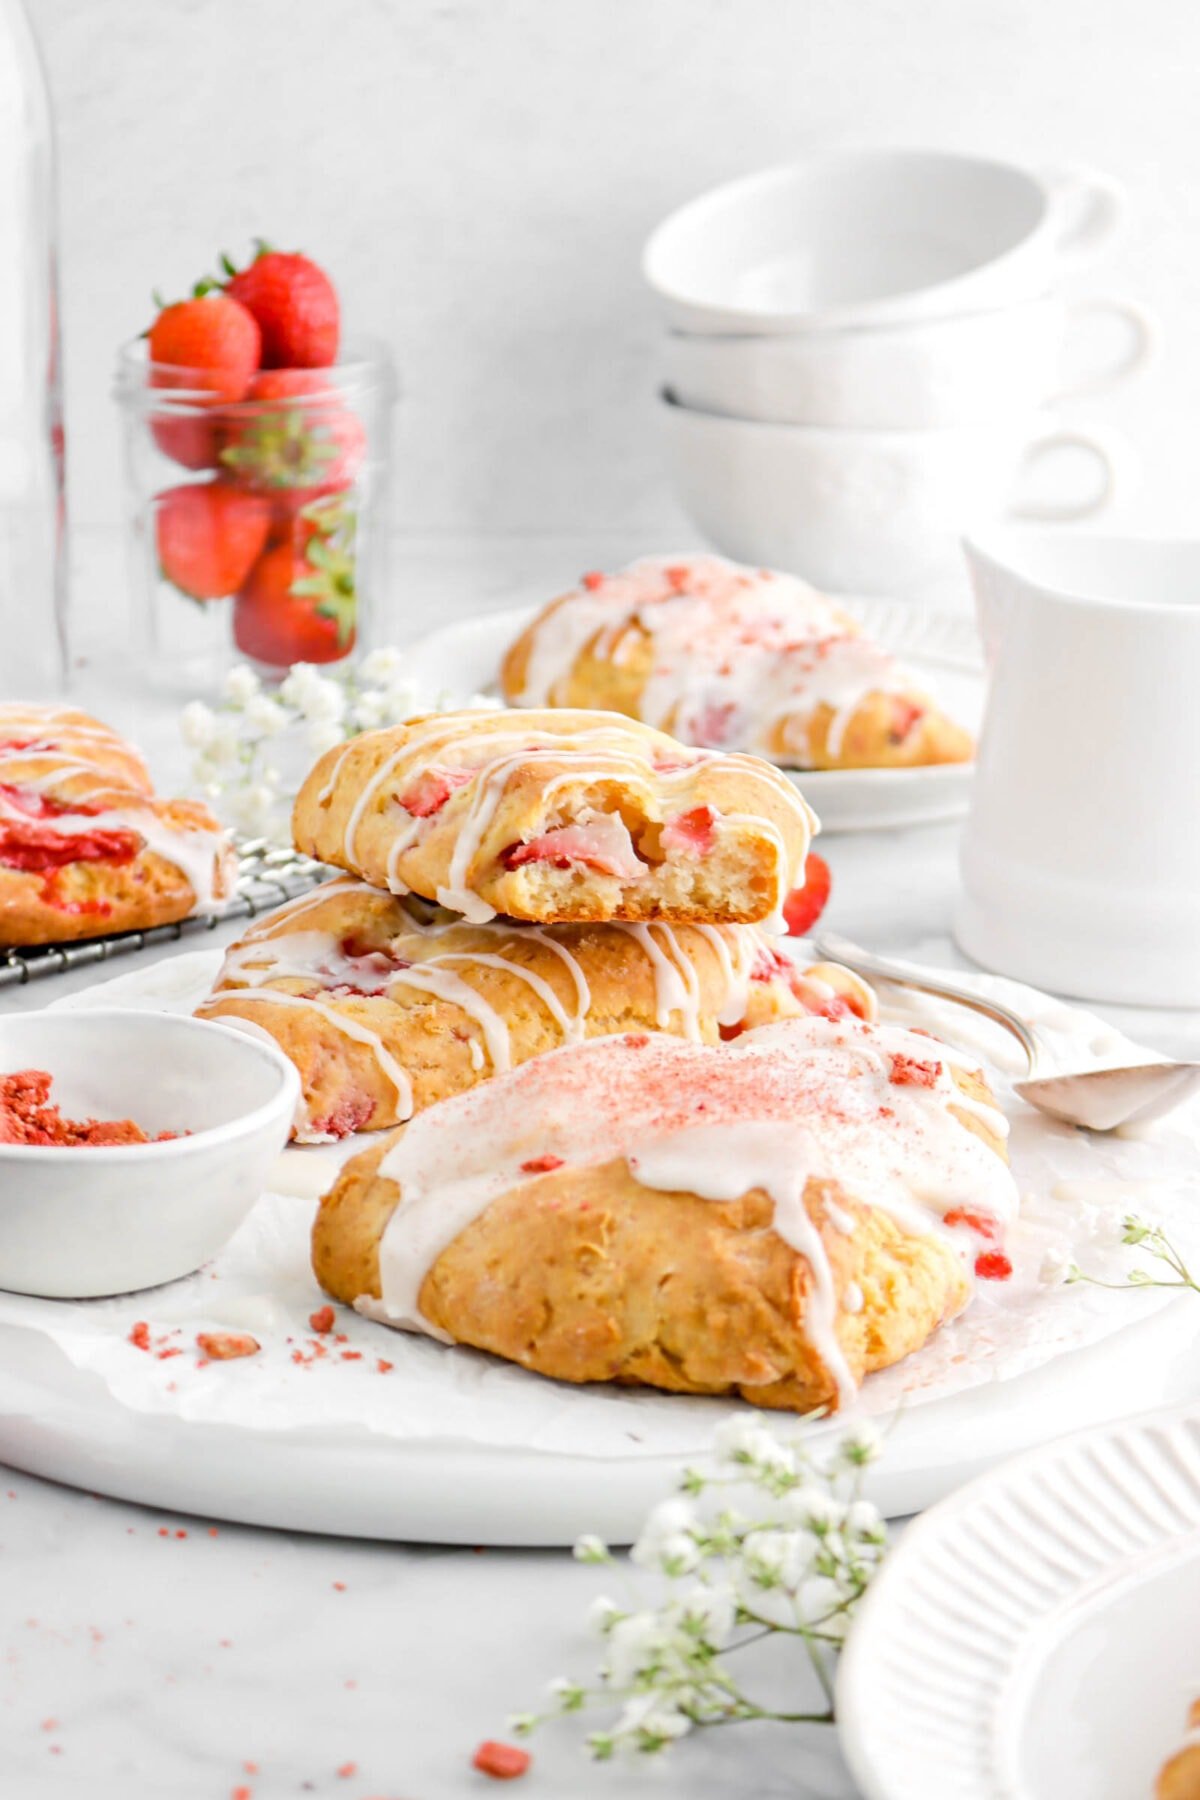 strawberry scone with bite missing stacked on another scone on upside downw hite palte with more scones around, jar of fresh strawberries, and stack of white coffee mugs